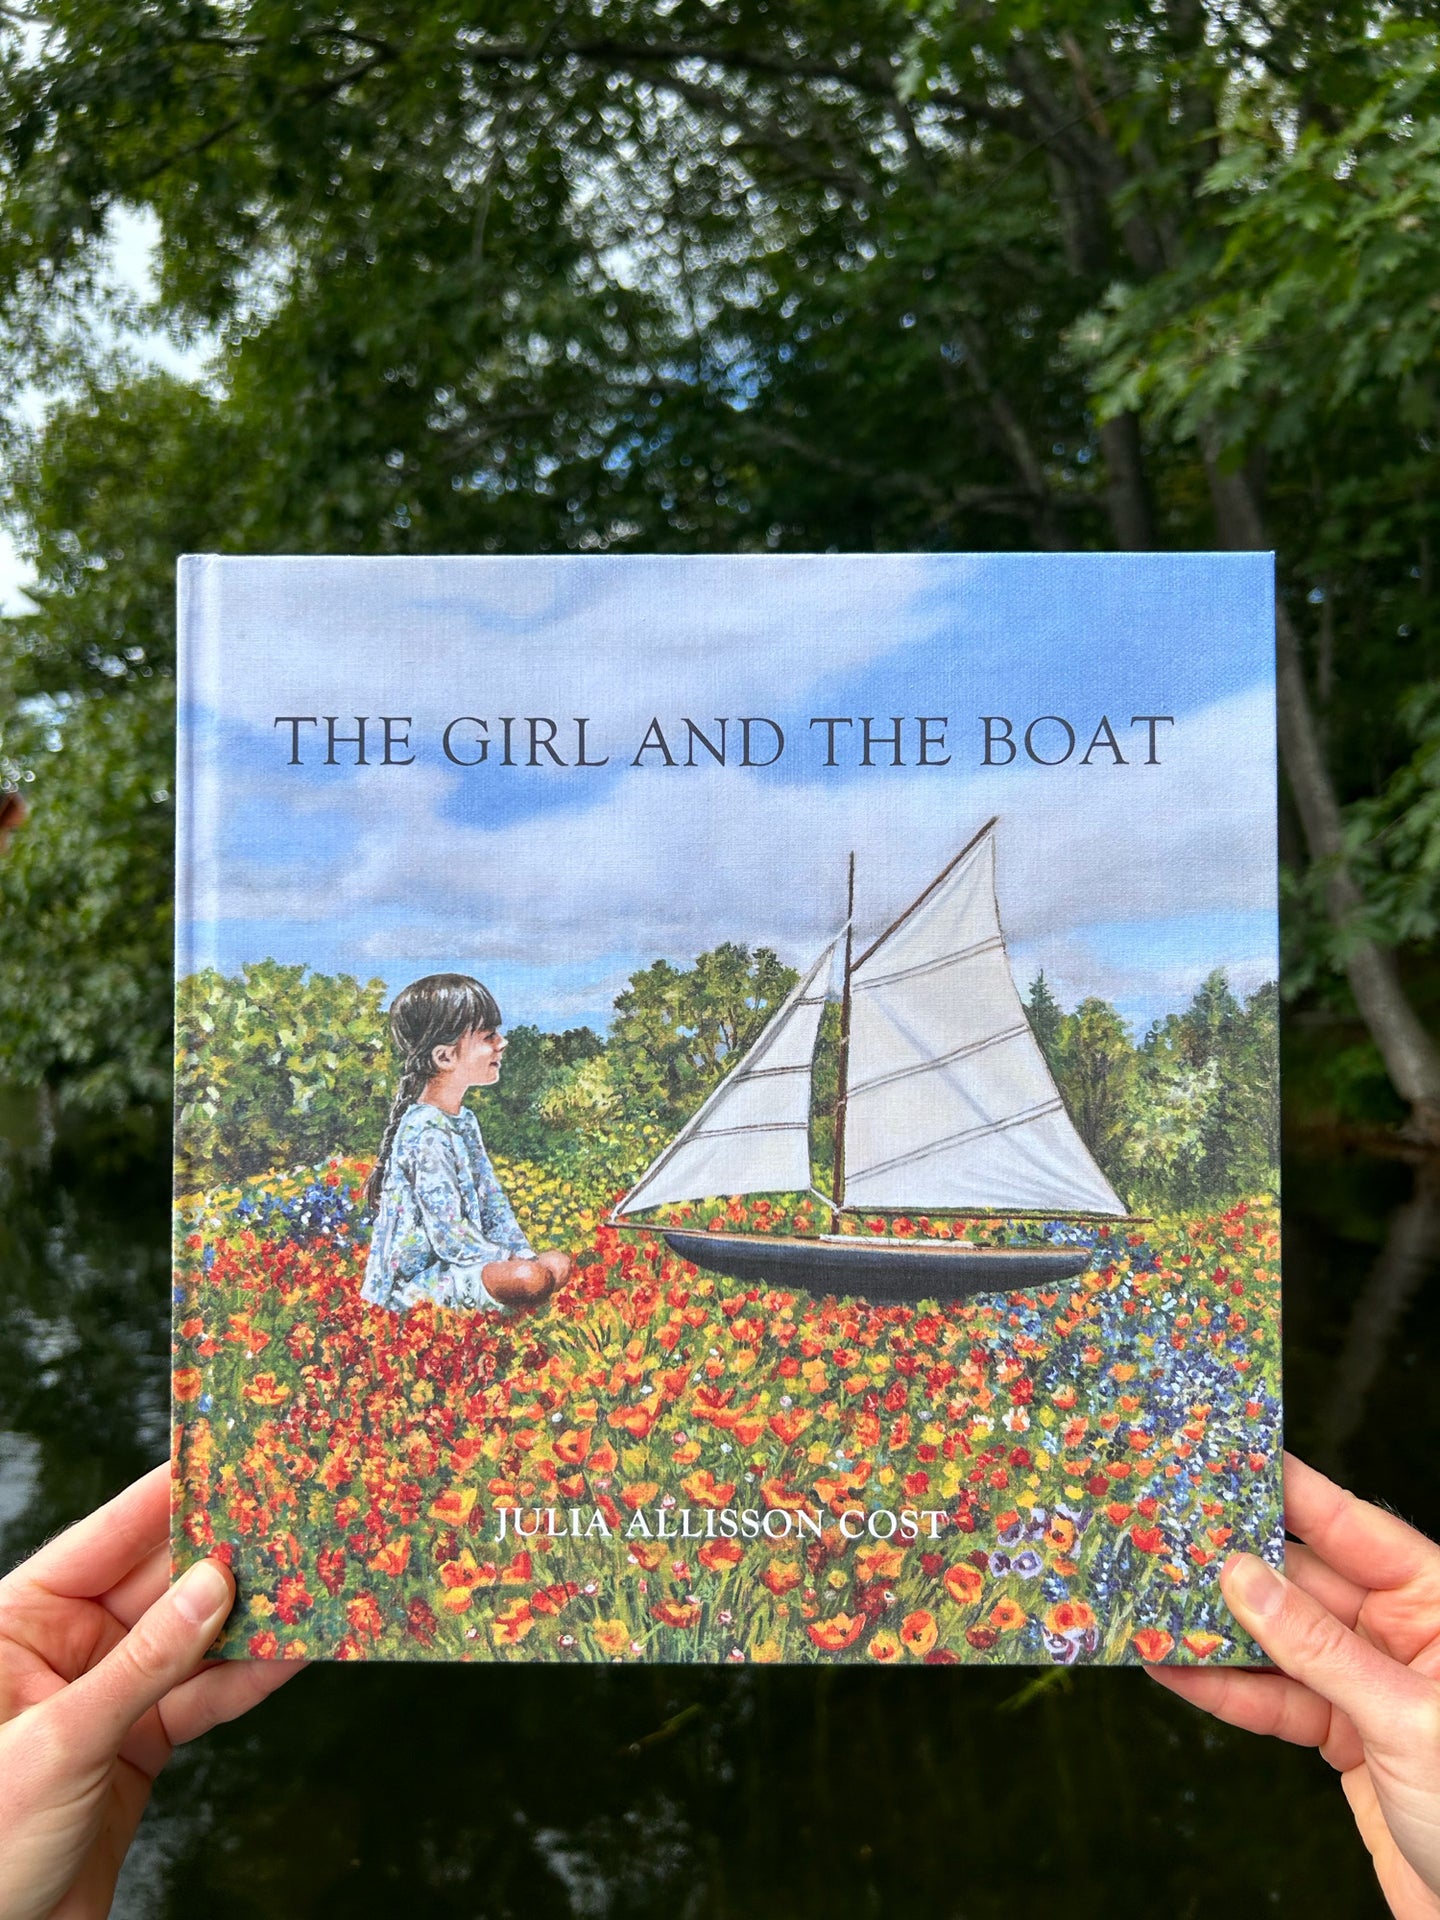 THE GIRL AND THE BOAT, a wordless picture book by Julia Allisson Cost